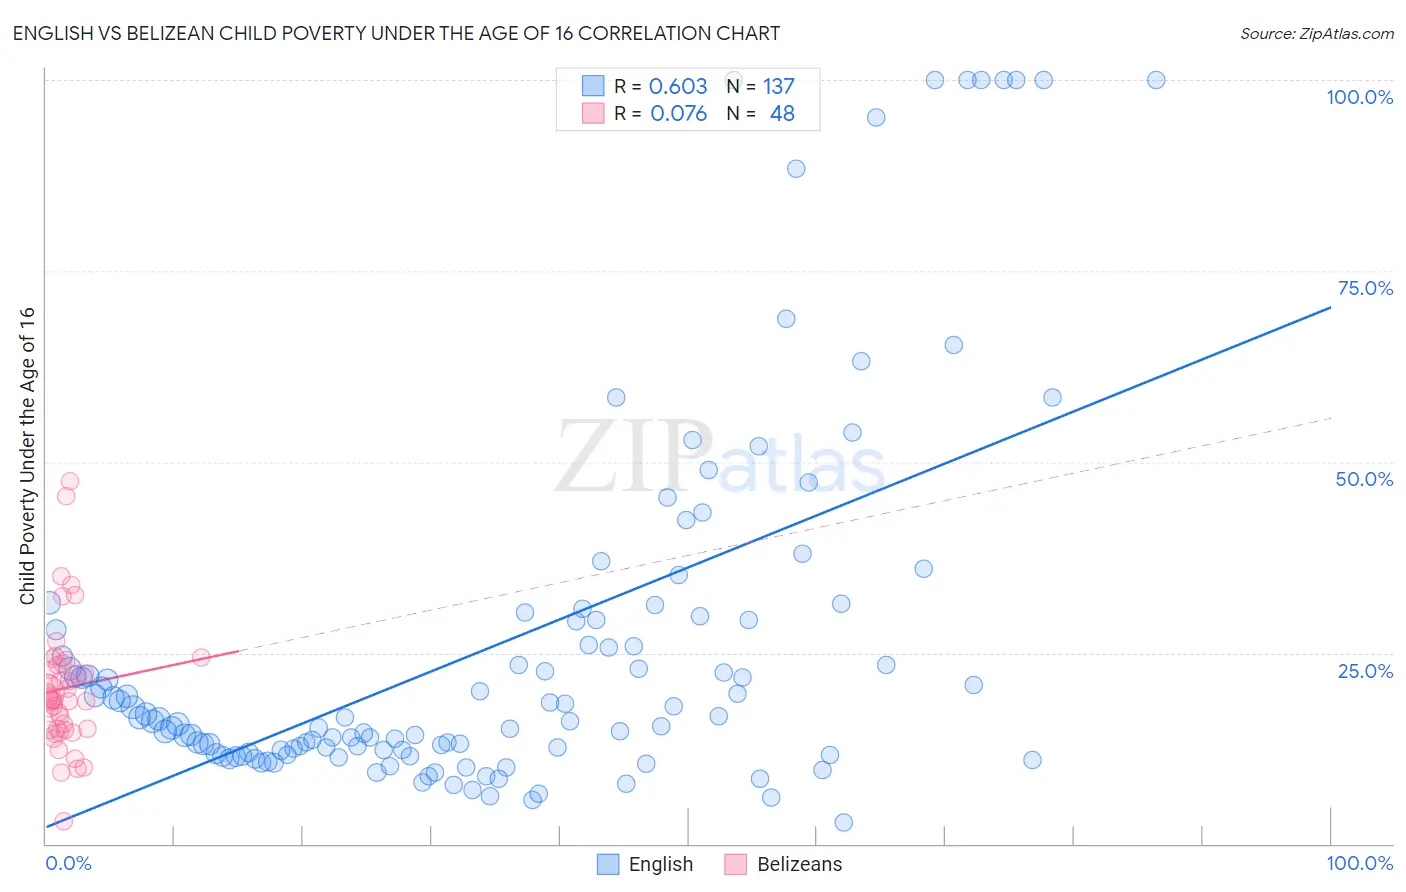 English vs Belizean Child Poverty Under the Age of 16